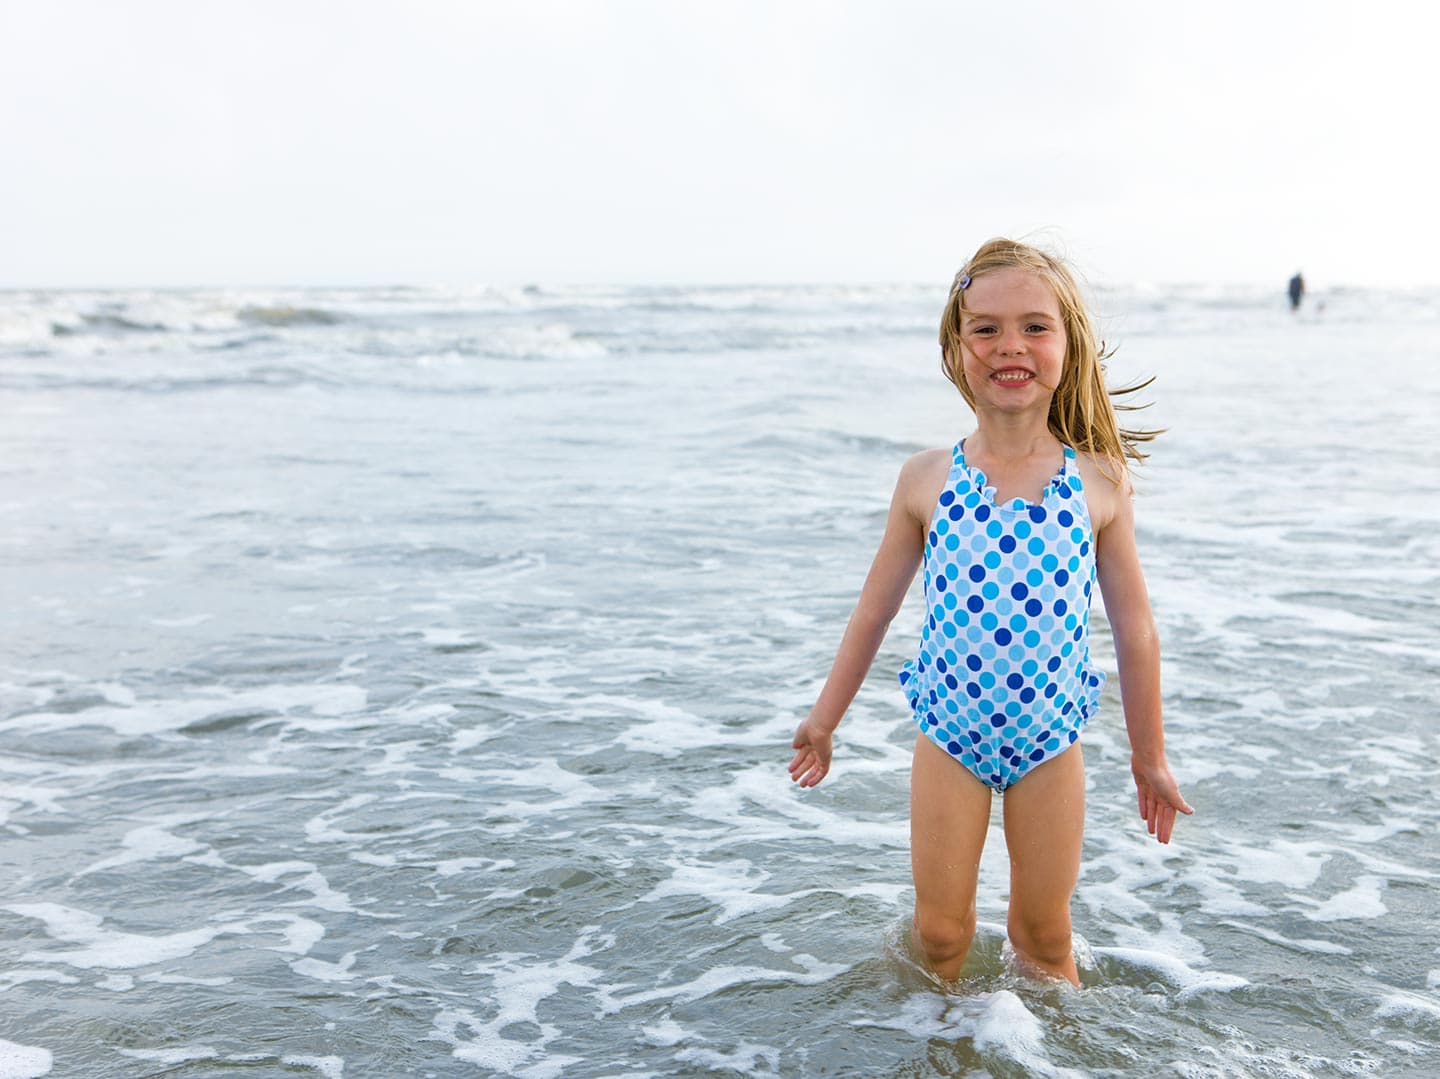 Little Girl at Beach in Swimsuit Smiling in Water